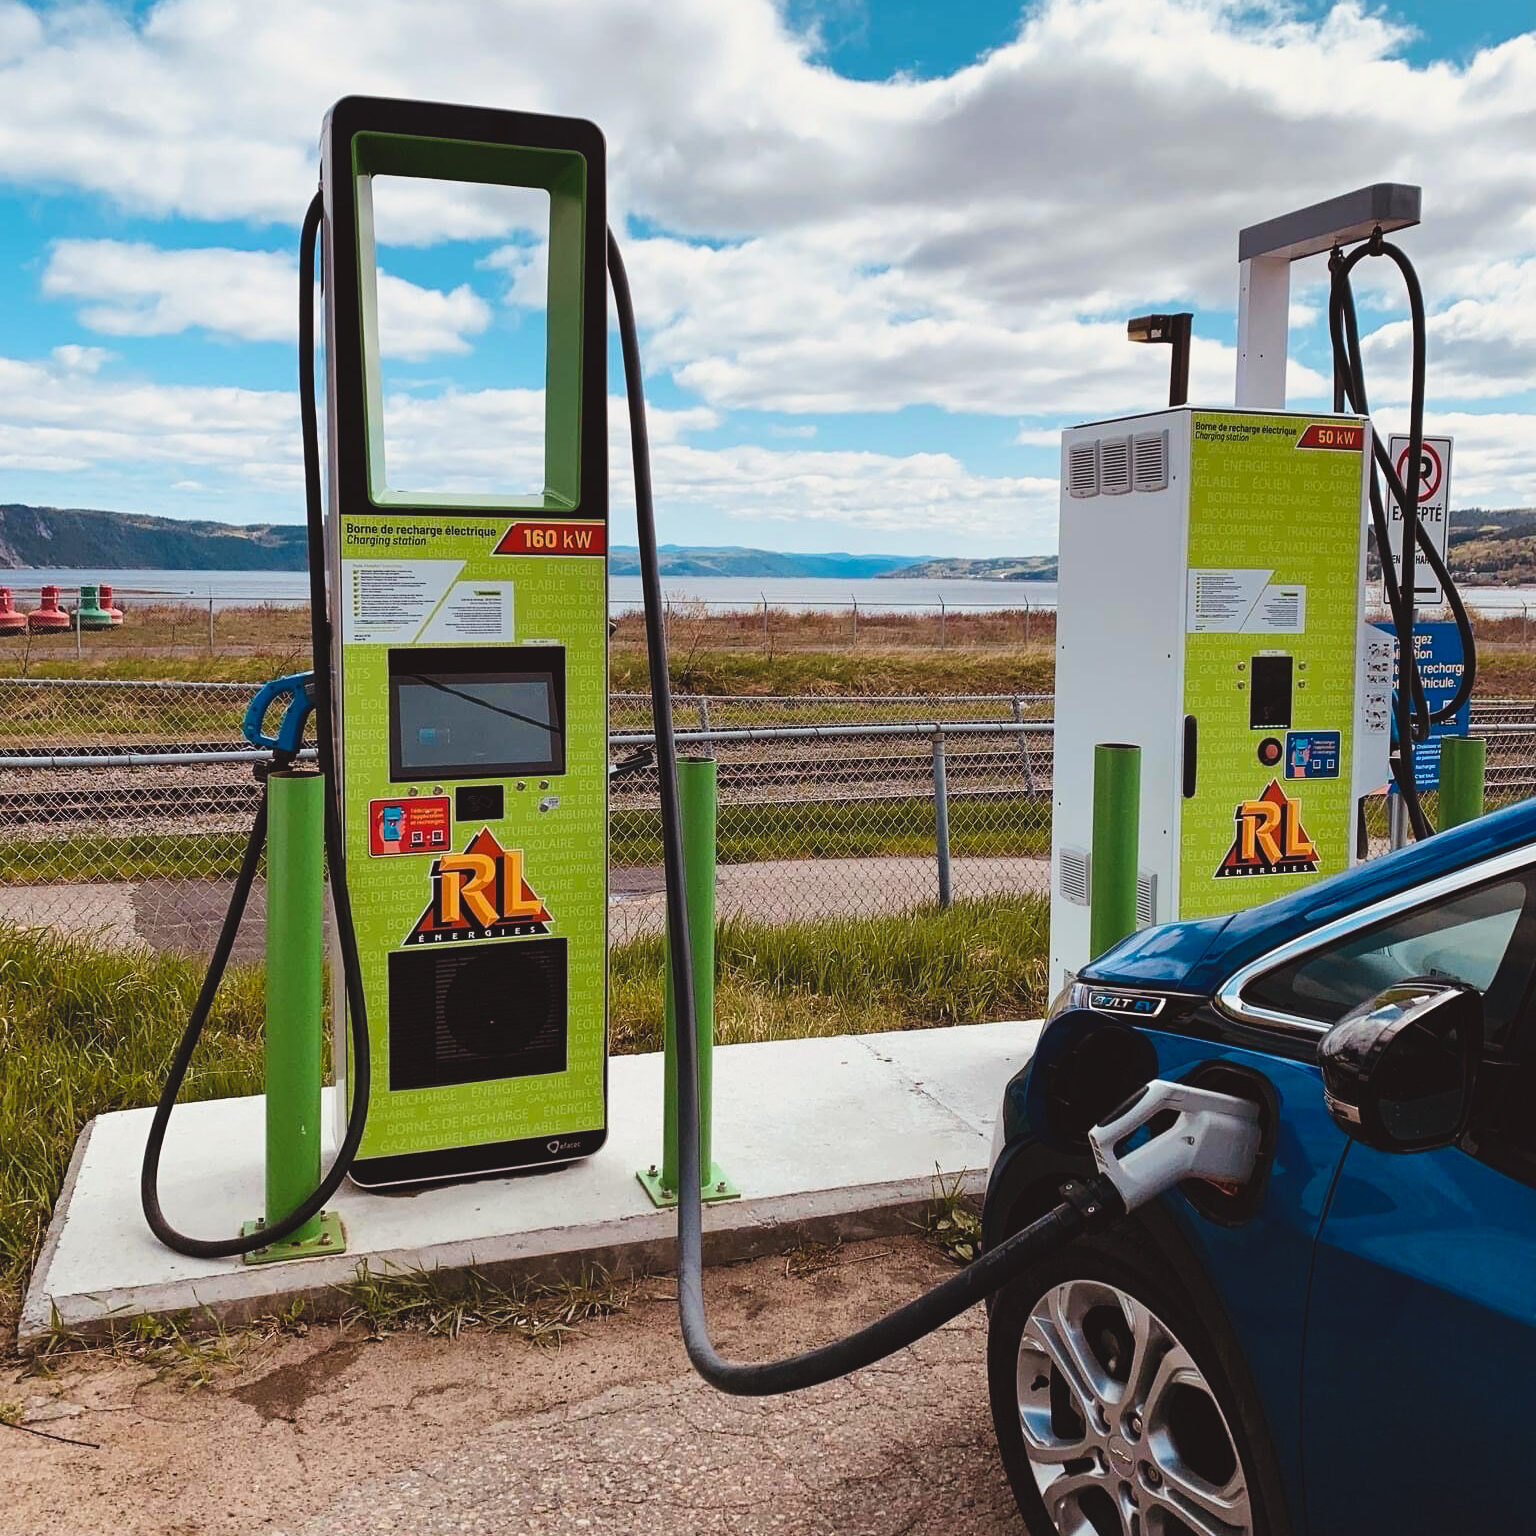 Cloudics white-label platform Rezzo in partnership with RL Energies, launches in the Canadian EV market